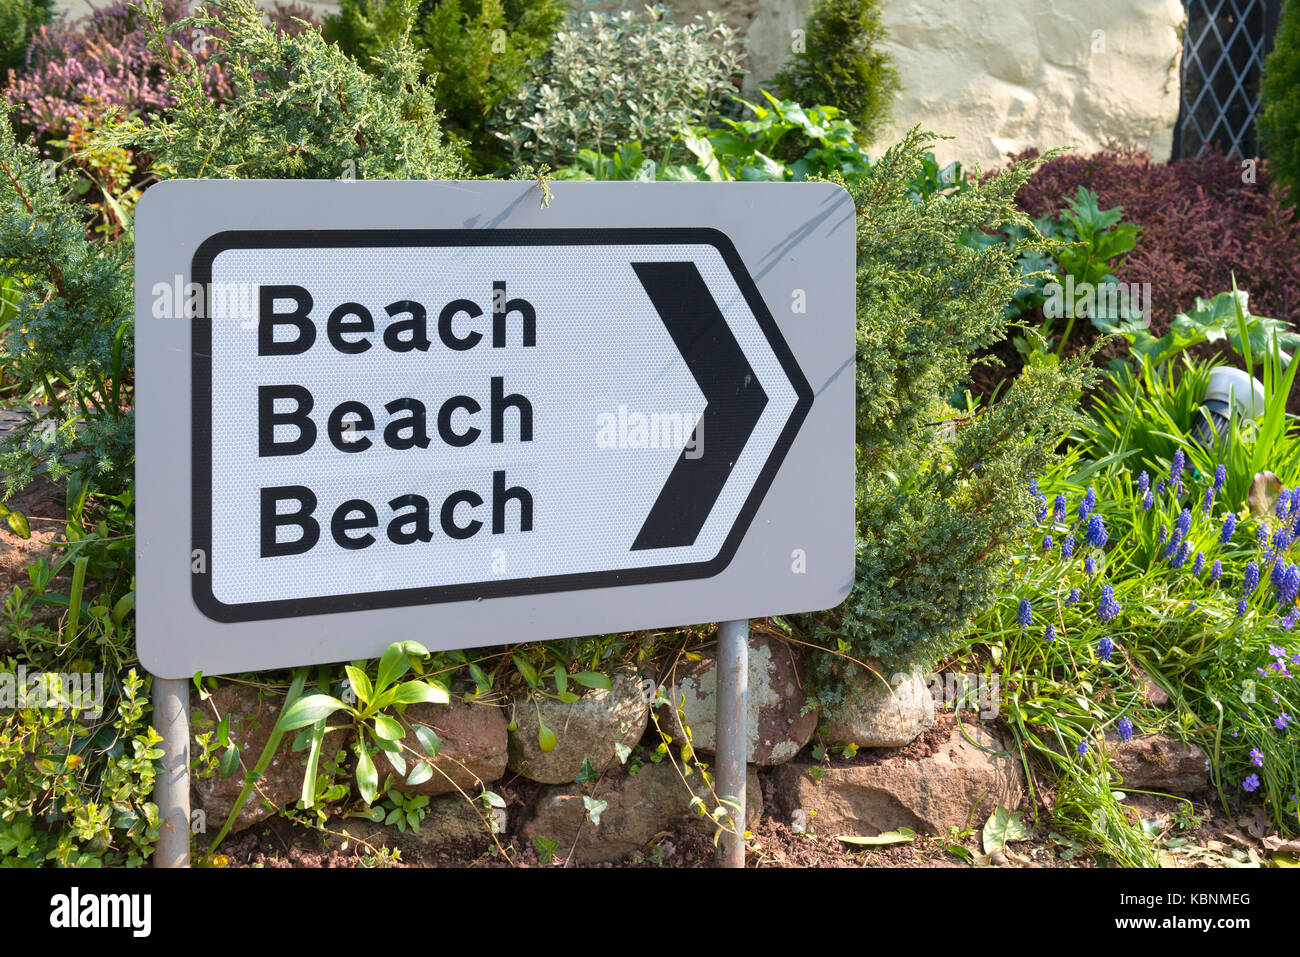 Composite of reflective 'Beach, Beach, Beach' sign pointing right with flowers and shrubs in the background Stock Photo